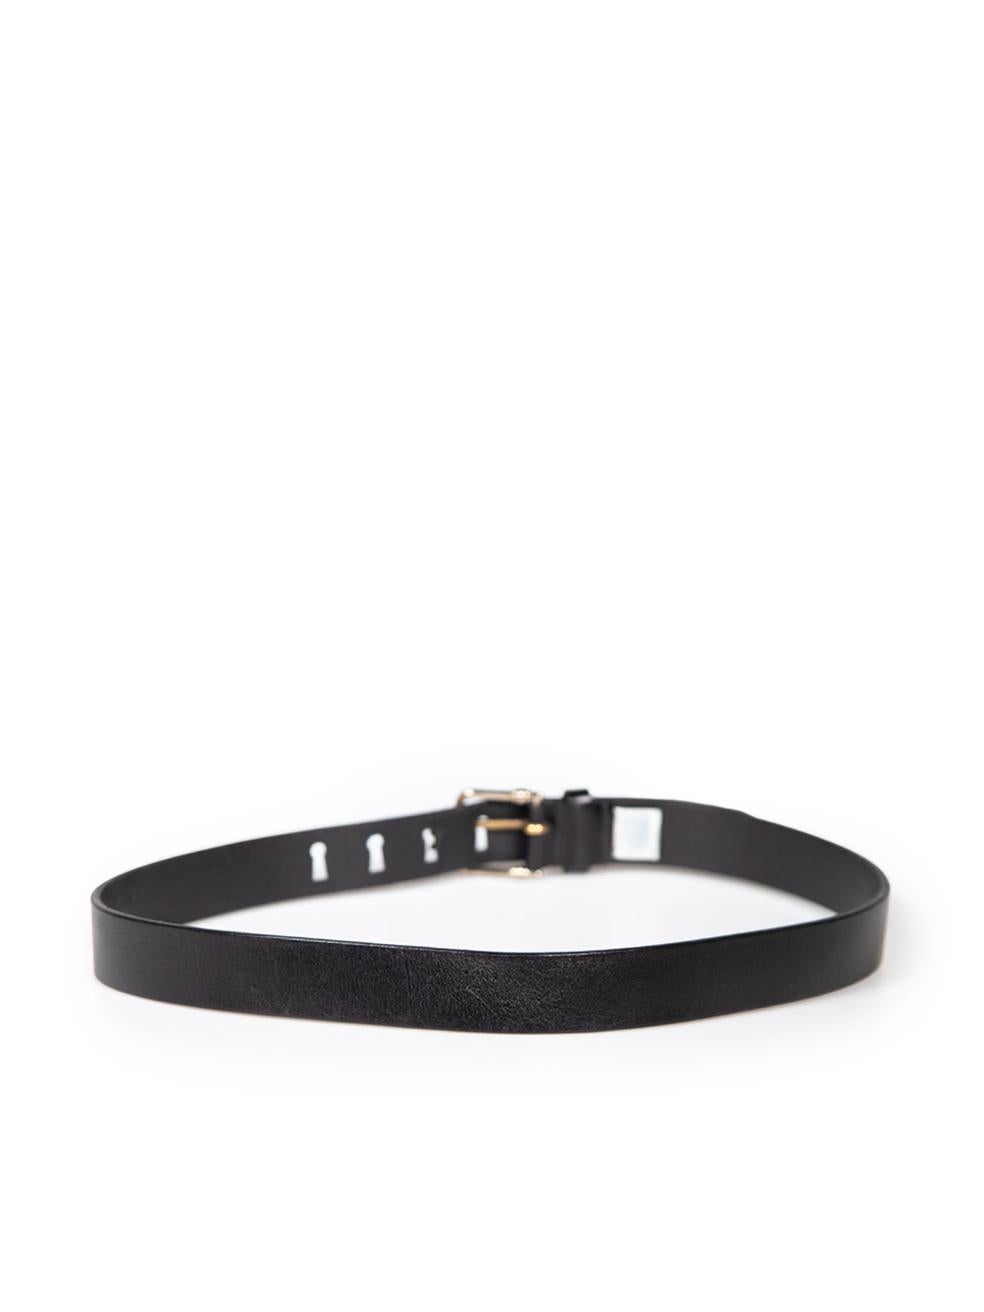 Dolce & Gabbana D&G Black Leather Key Hole Accent Belt In Good Condition For Sale In London, GB